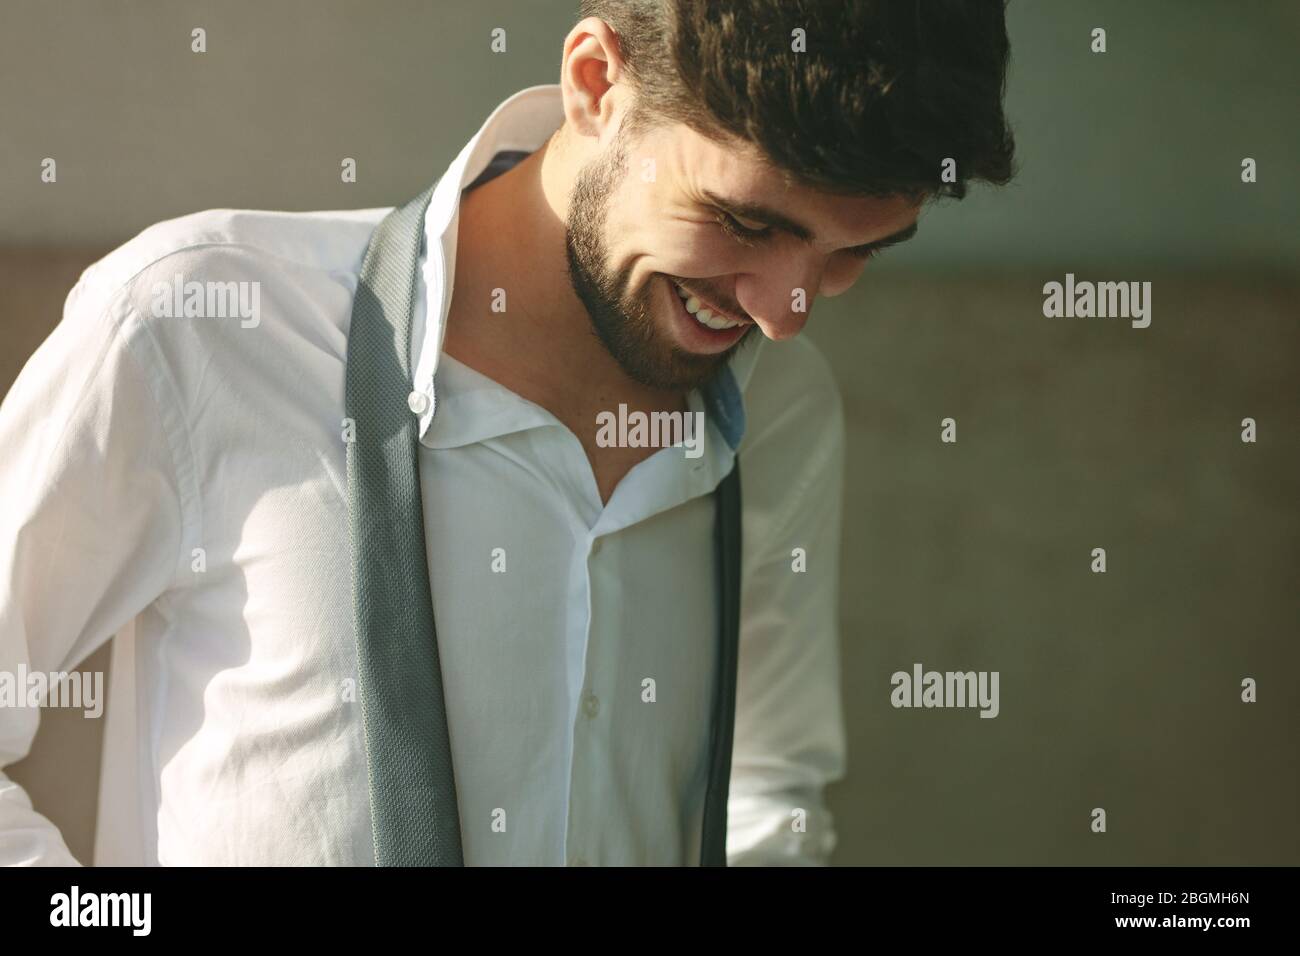 Smiling man getting dressed in morning. businessman getting ready for the office, wearing shirt and tie at home. Stock Photo